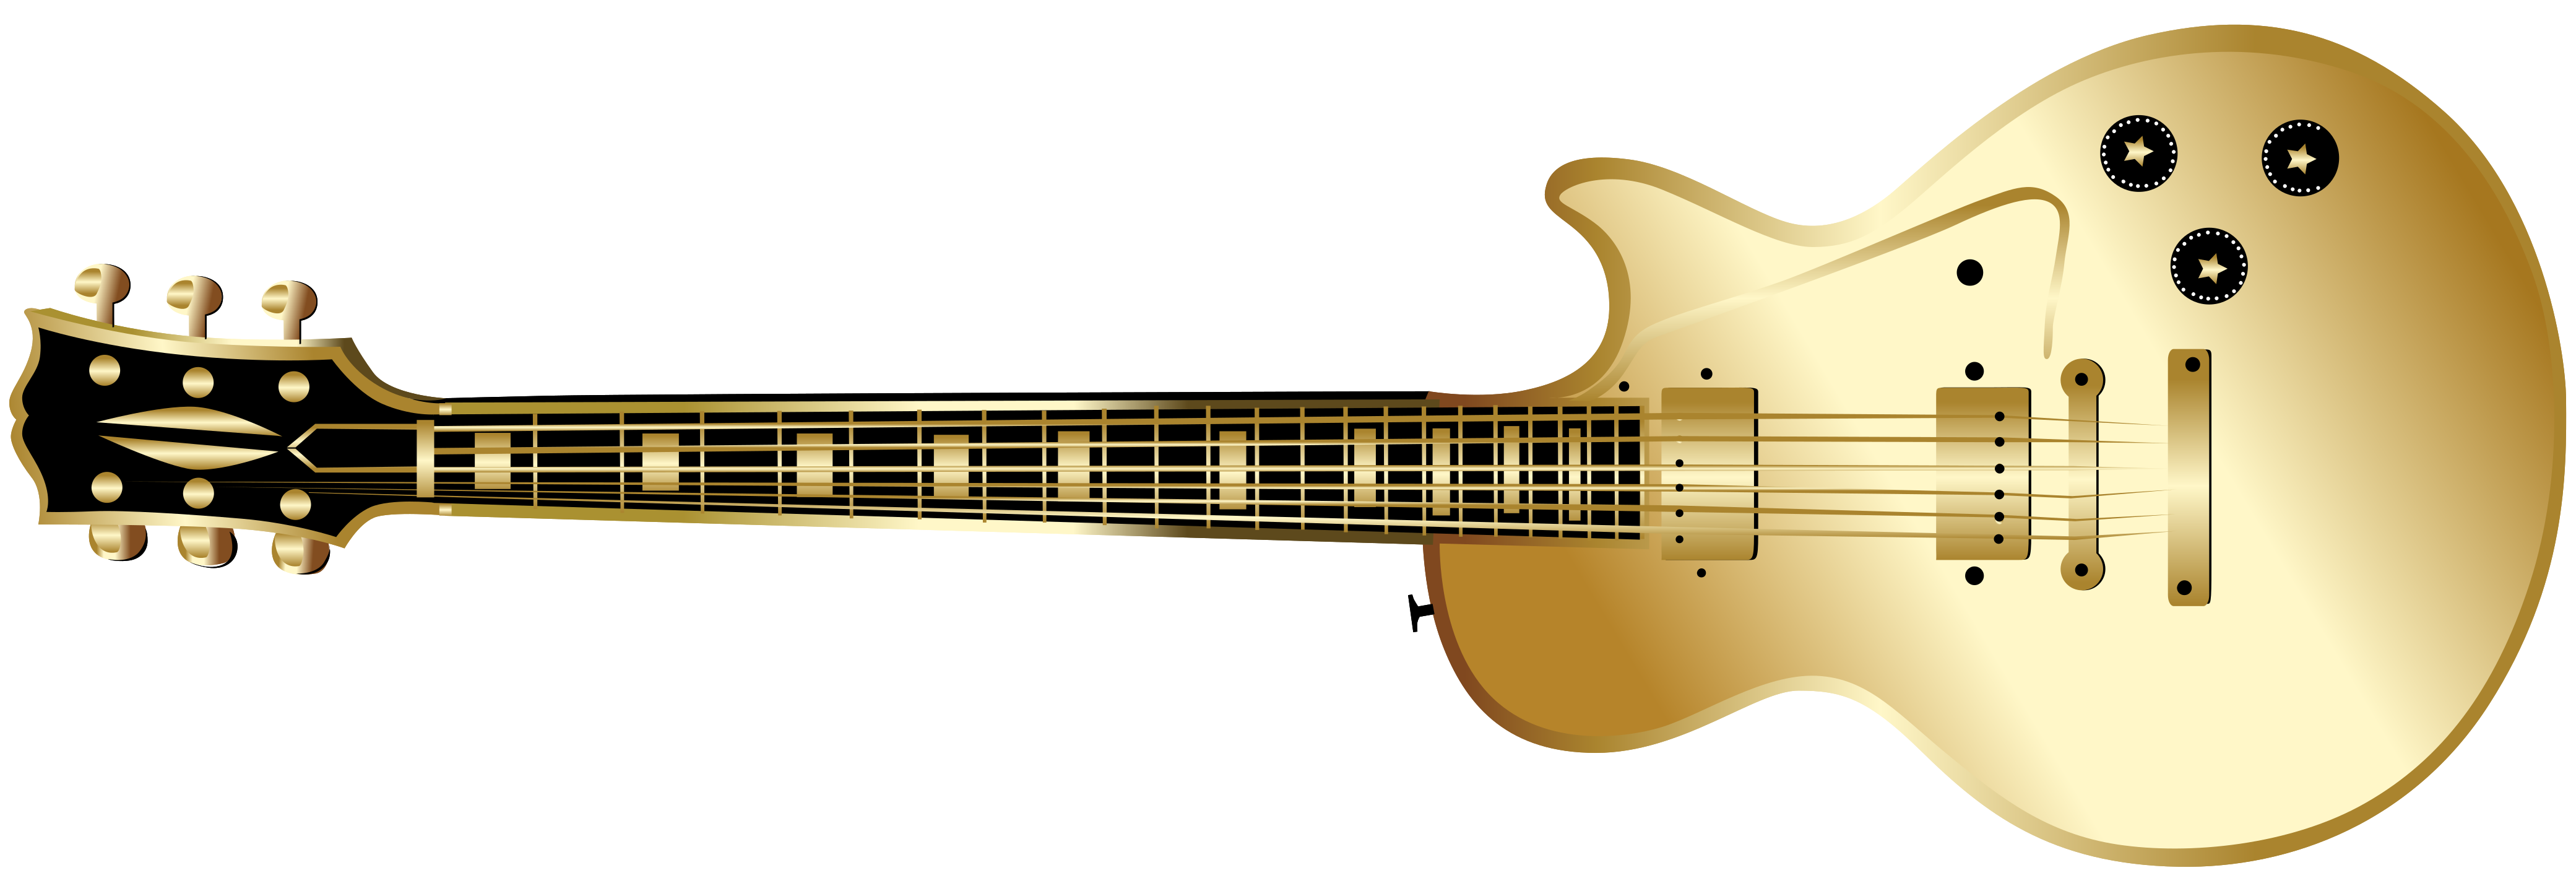 Guitar Golden Electric Free Photo PNG Image